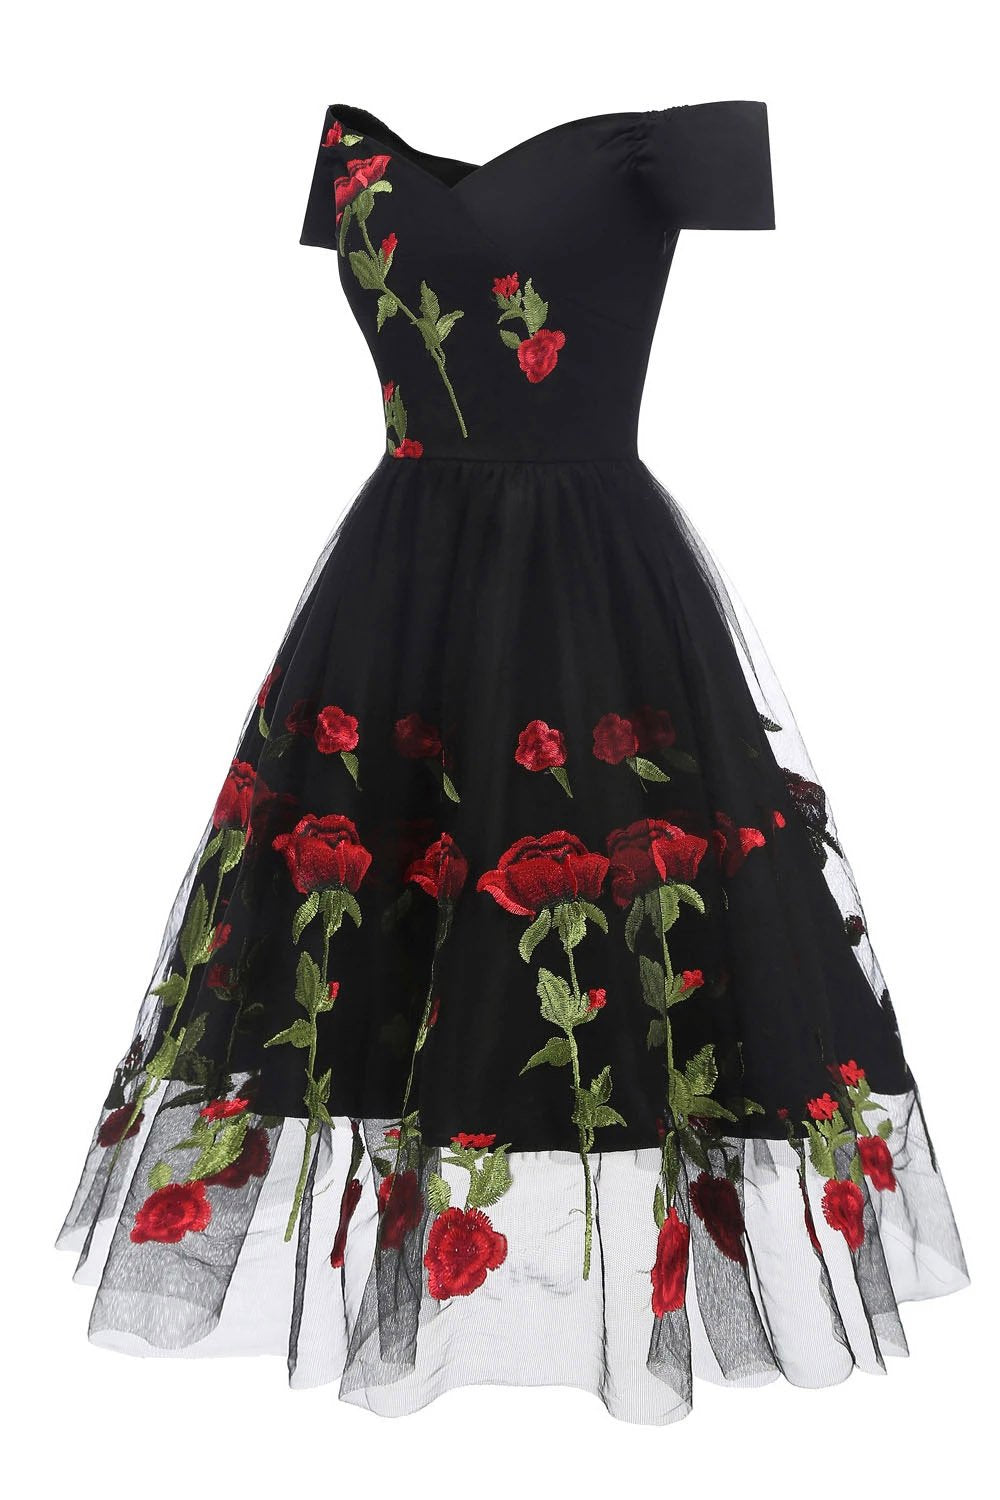 Retro Off the Shoulder Tulle Black Party Dress with Flowers, Knee Length Homecoming Dress N2107